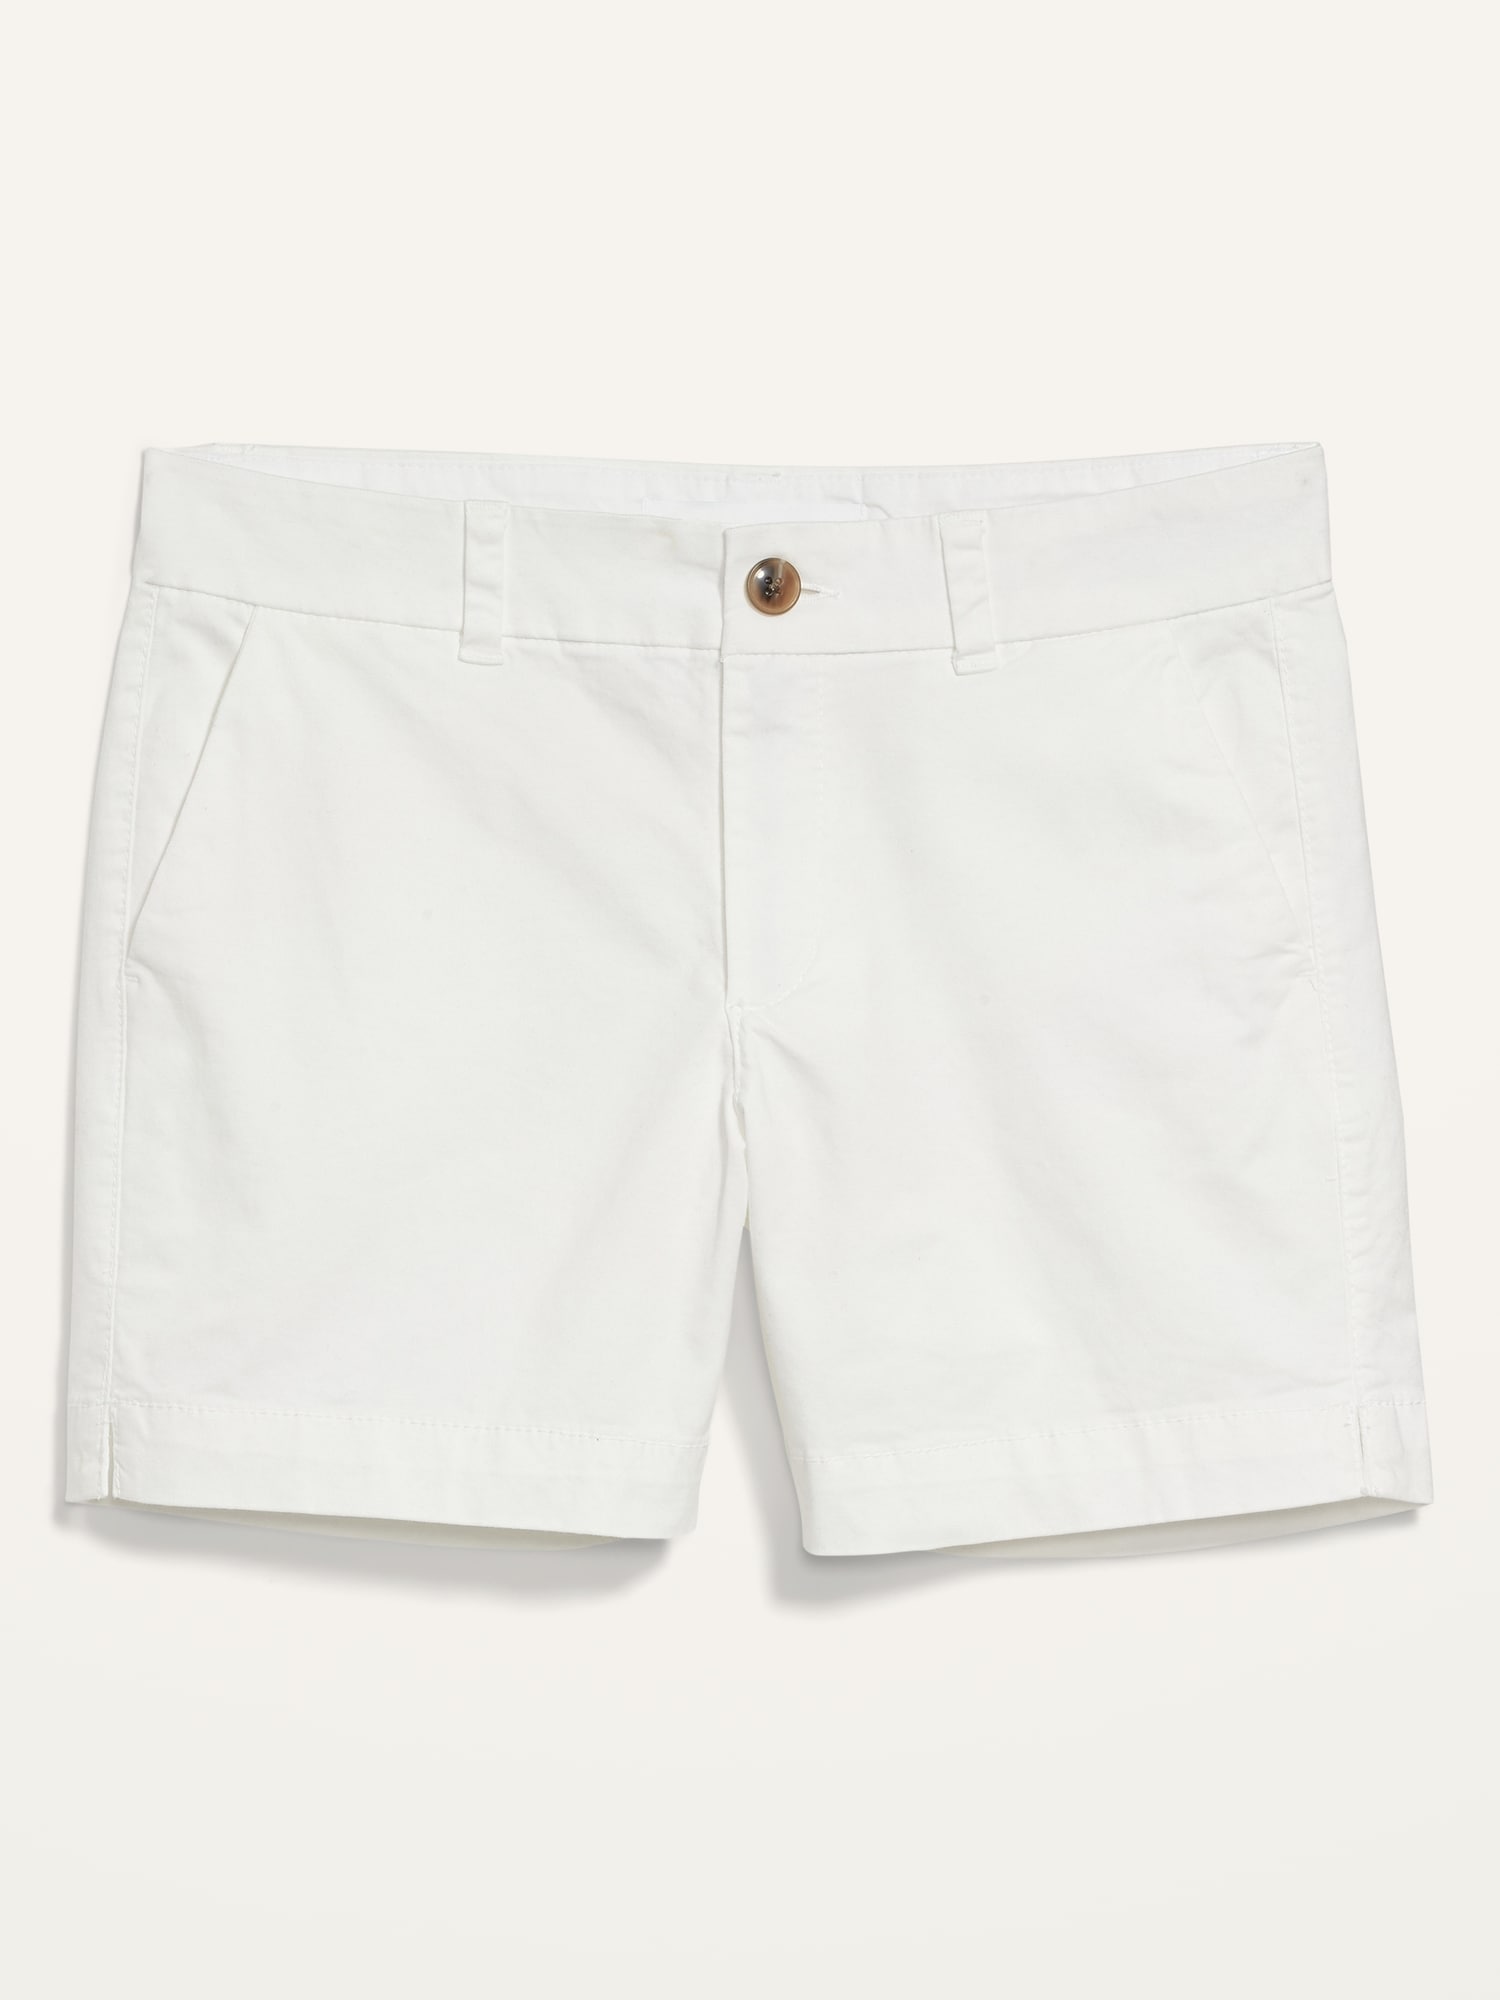 Mid-Rise Twill Everyday Shorts for Women - 5-inch inseam